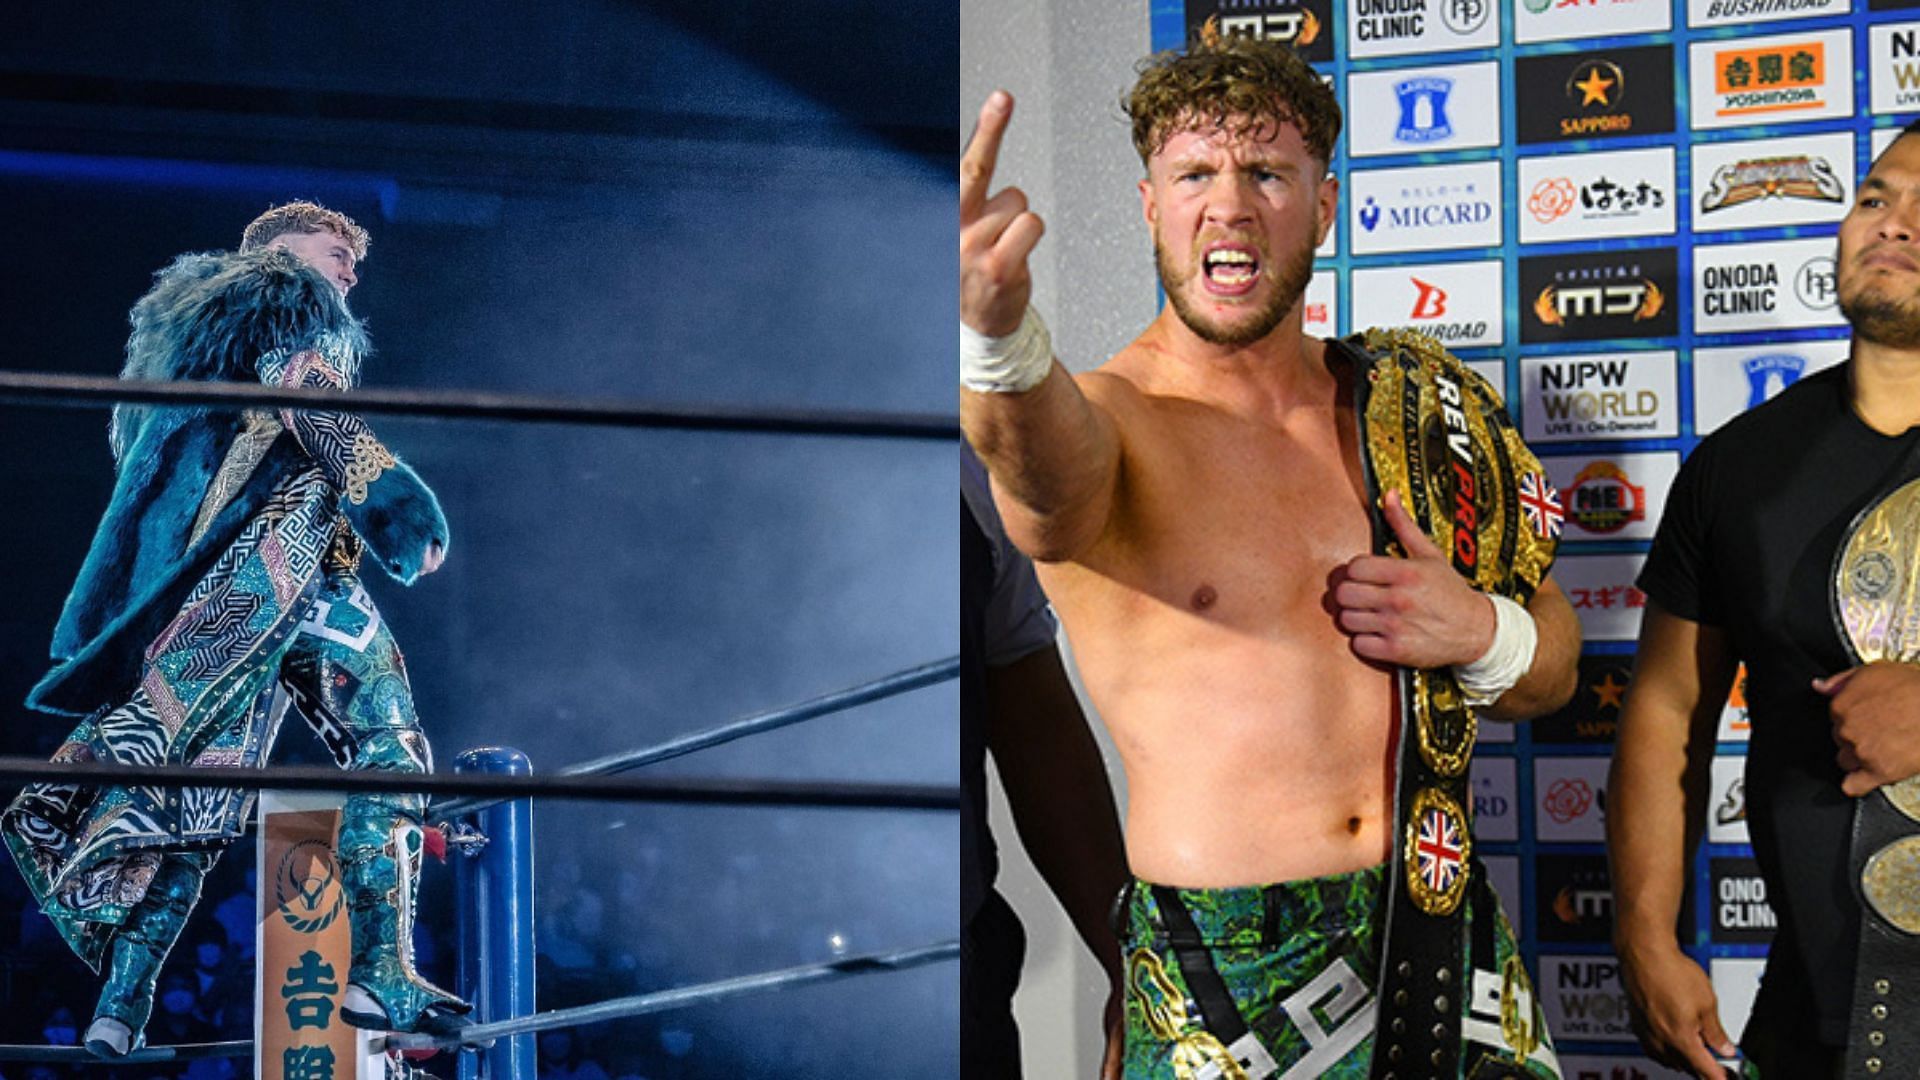 Will Ospreay is the current IWGP US Heavyweight Champion